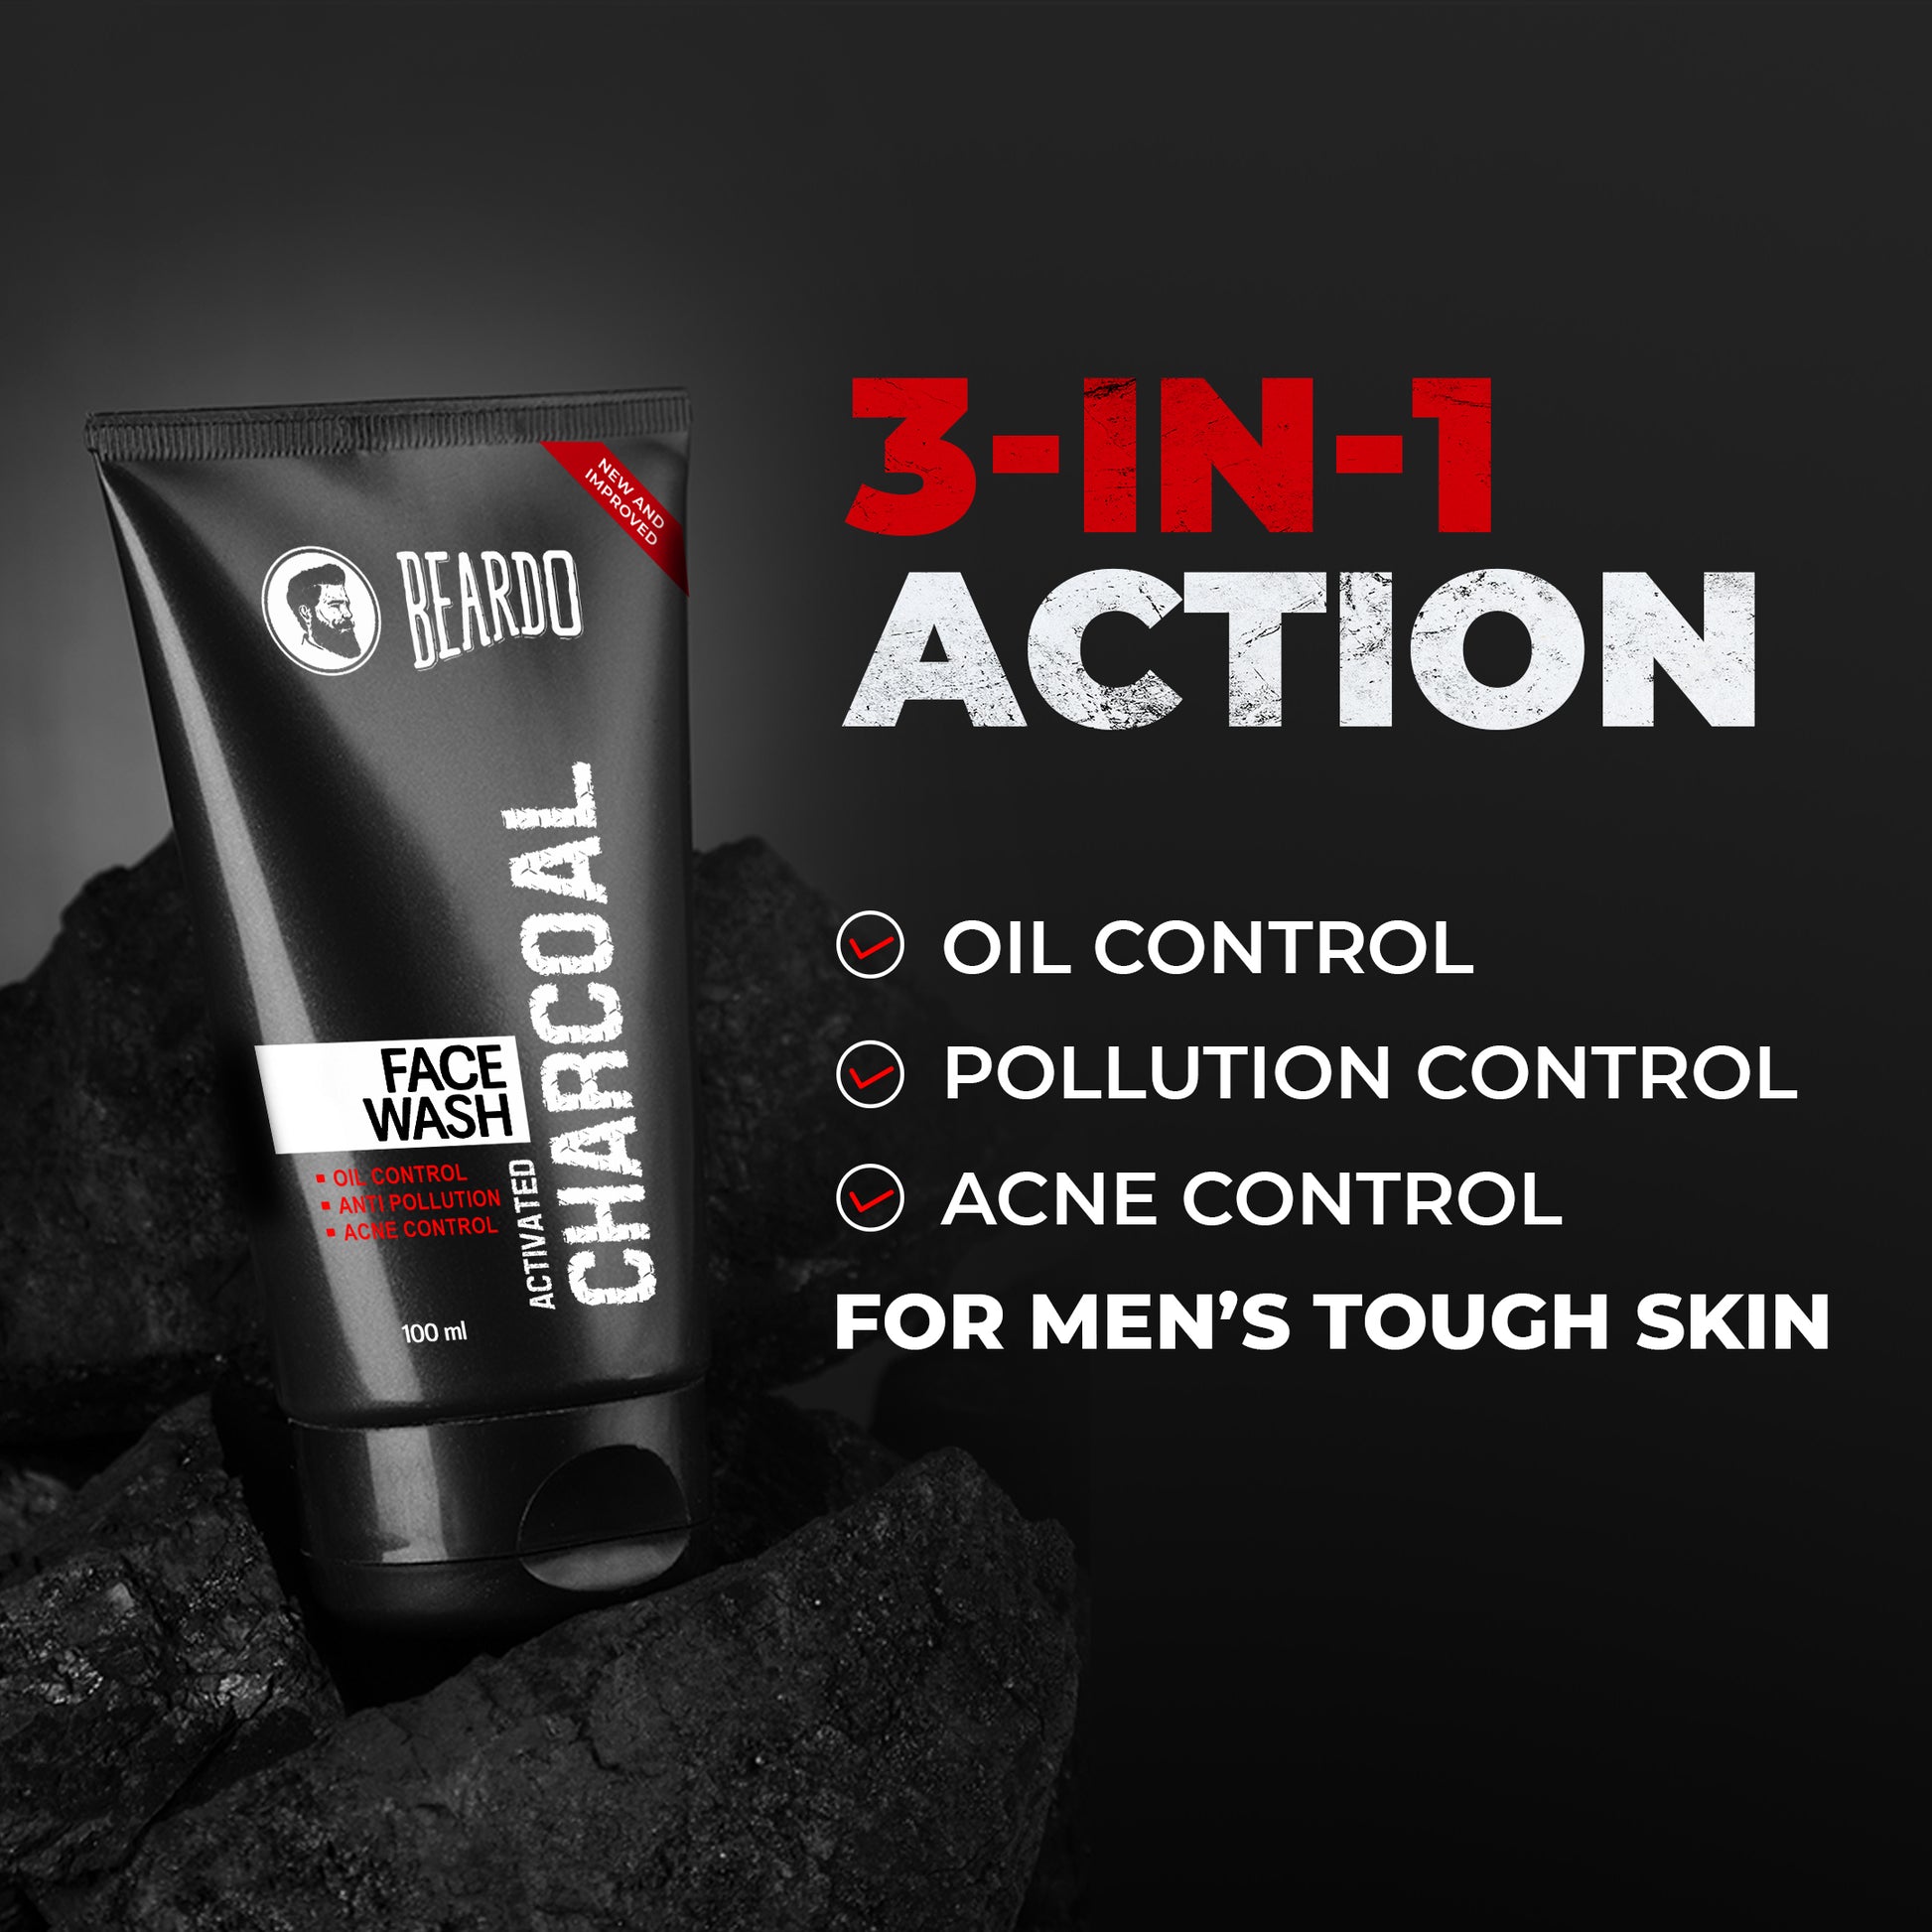 3 in 1 action, men's skin, oil control, pollution control face wash, acne control